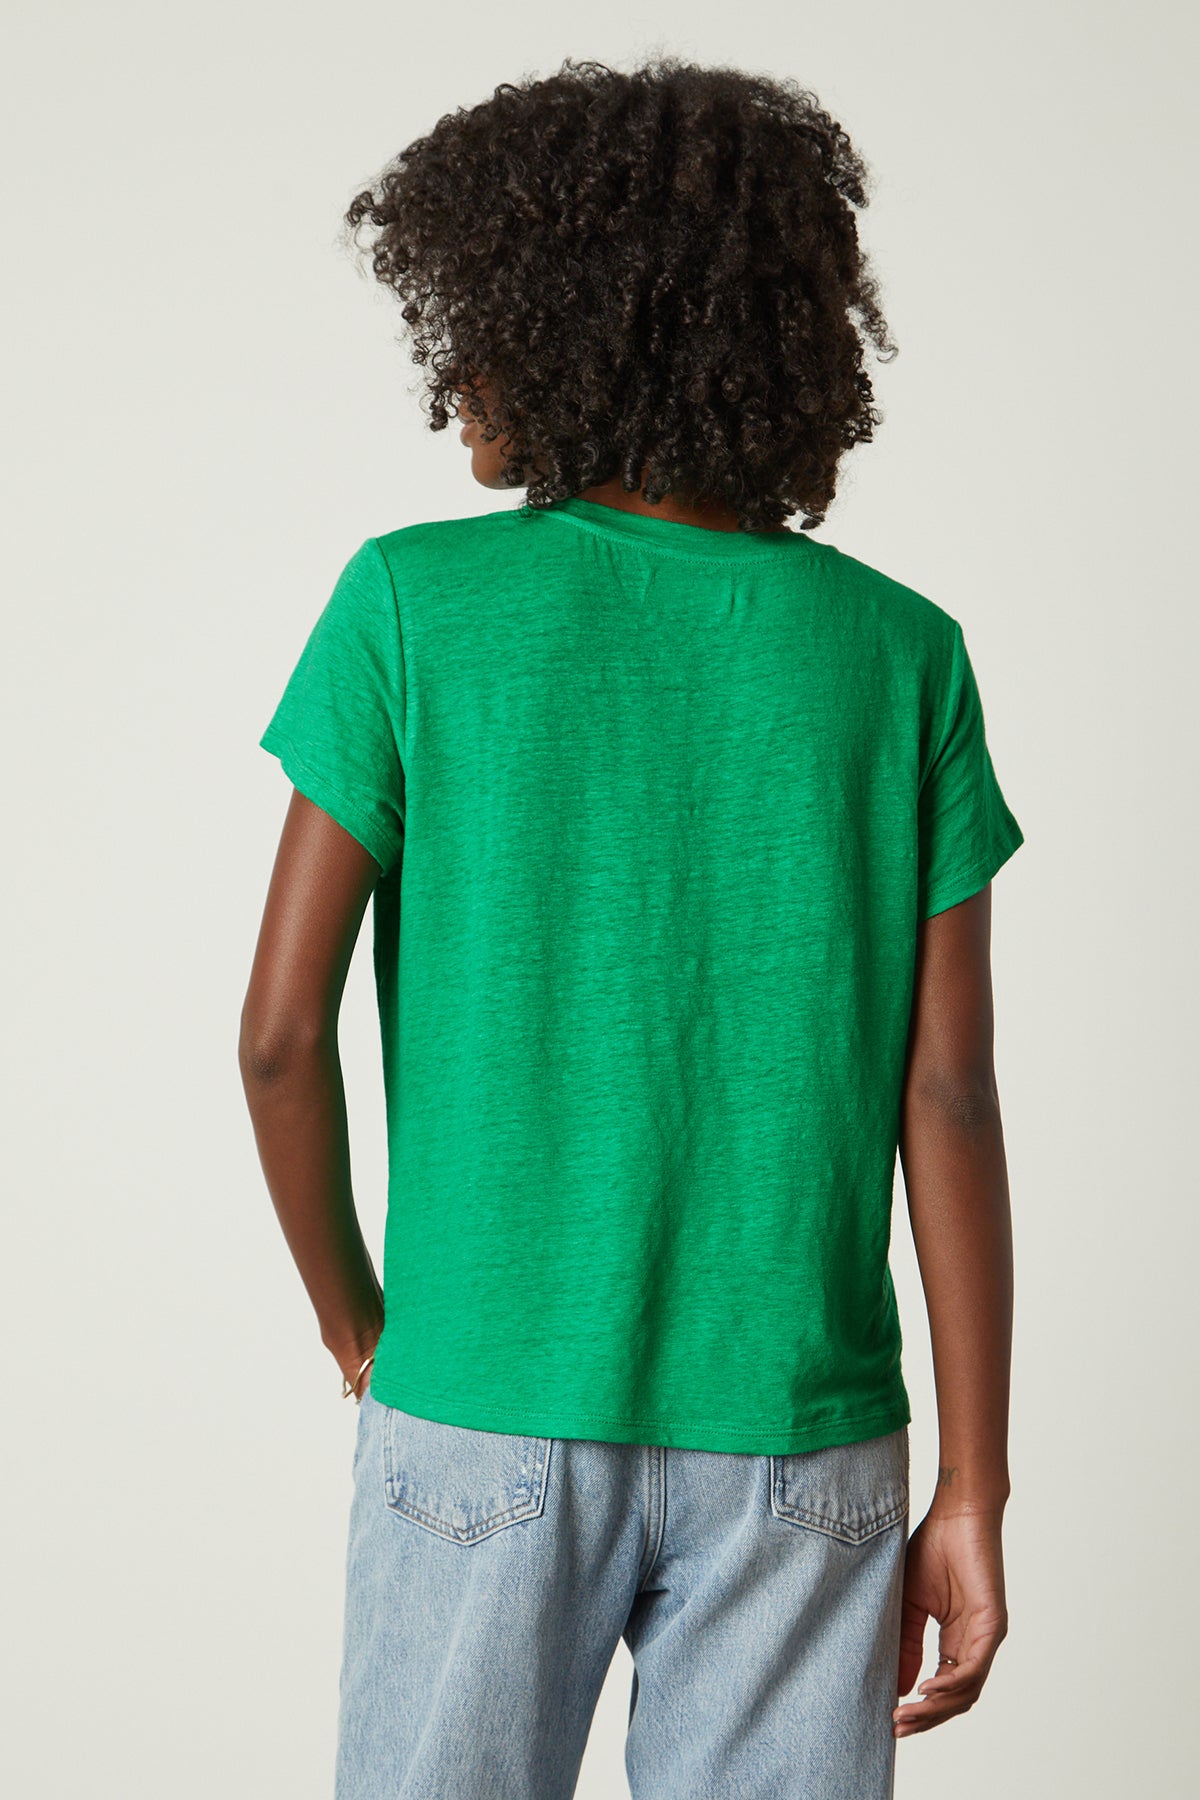 Casey Tee in emerald with blue denim back-26142585061569